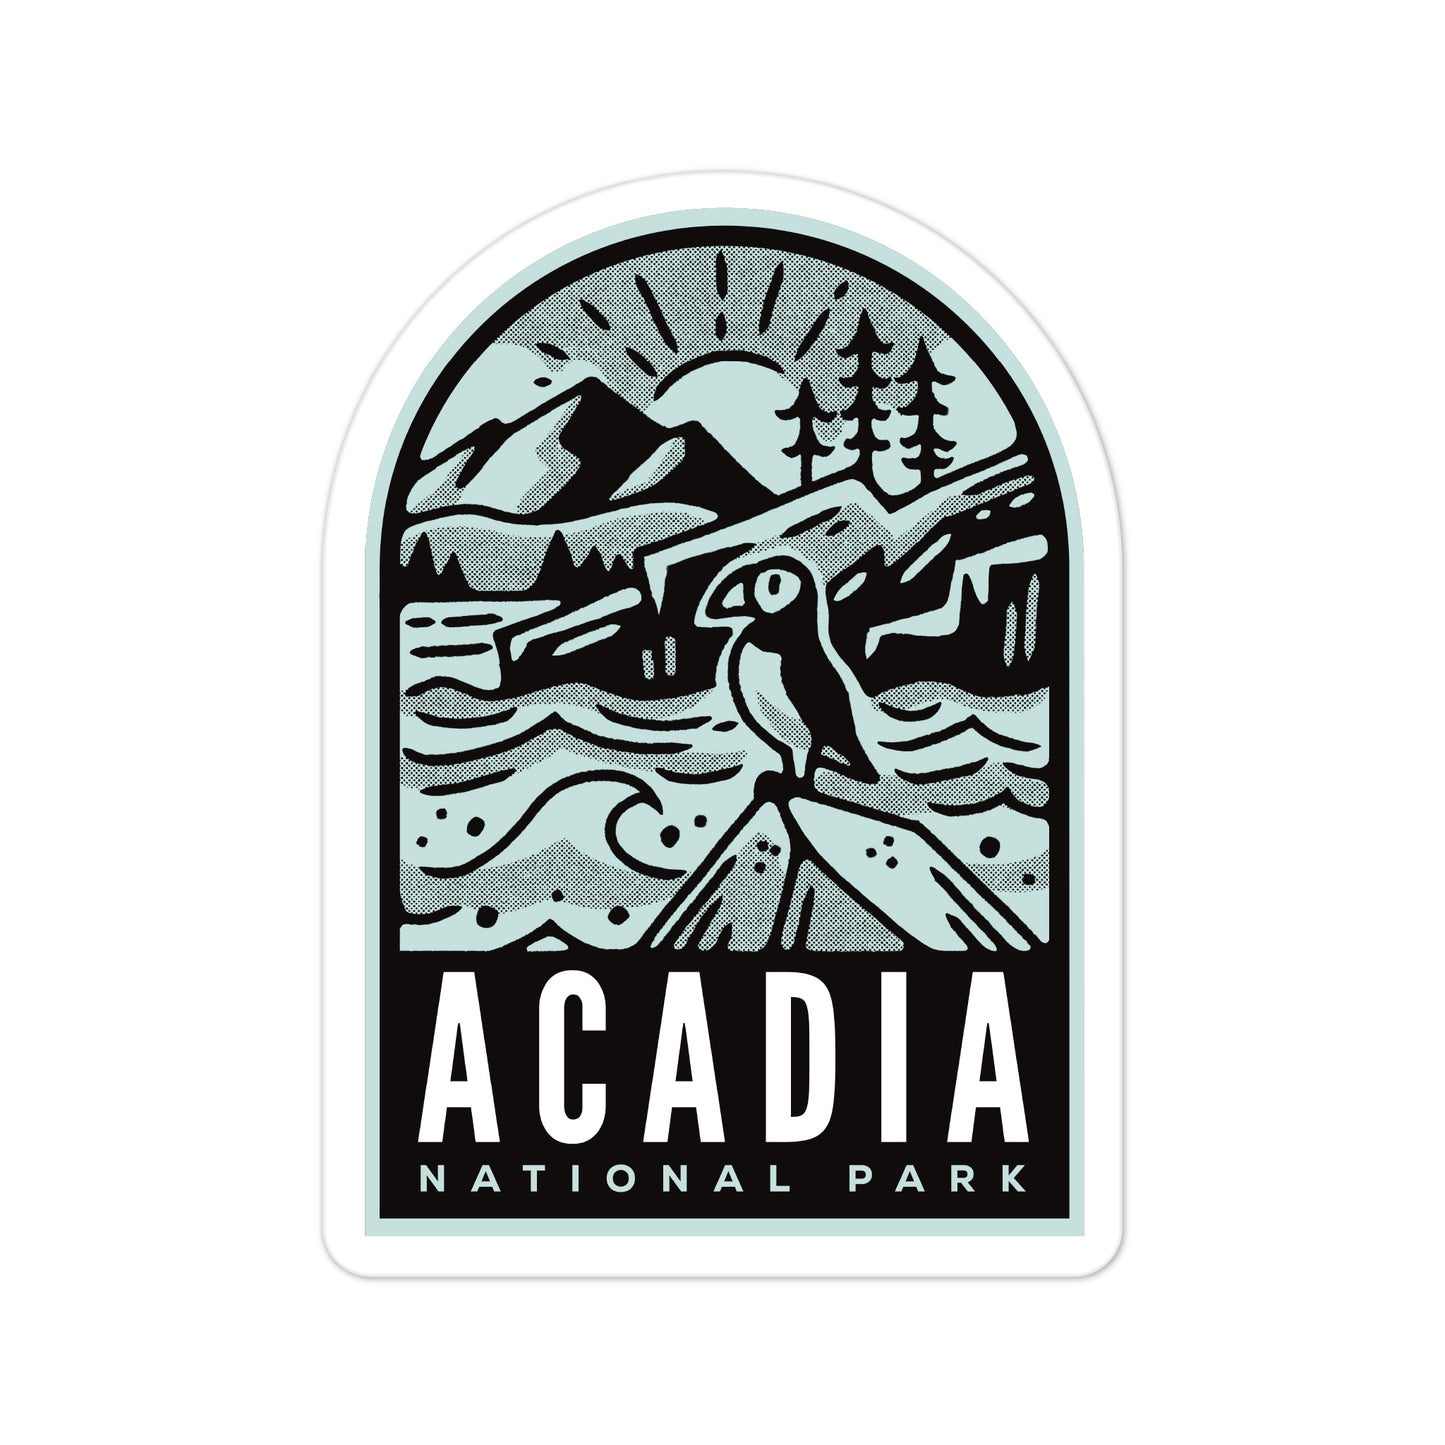 A sticker featuring an illustration of a puffin in Acadia National Park